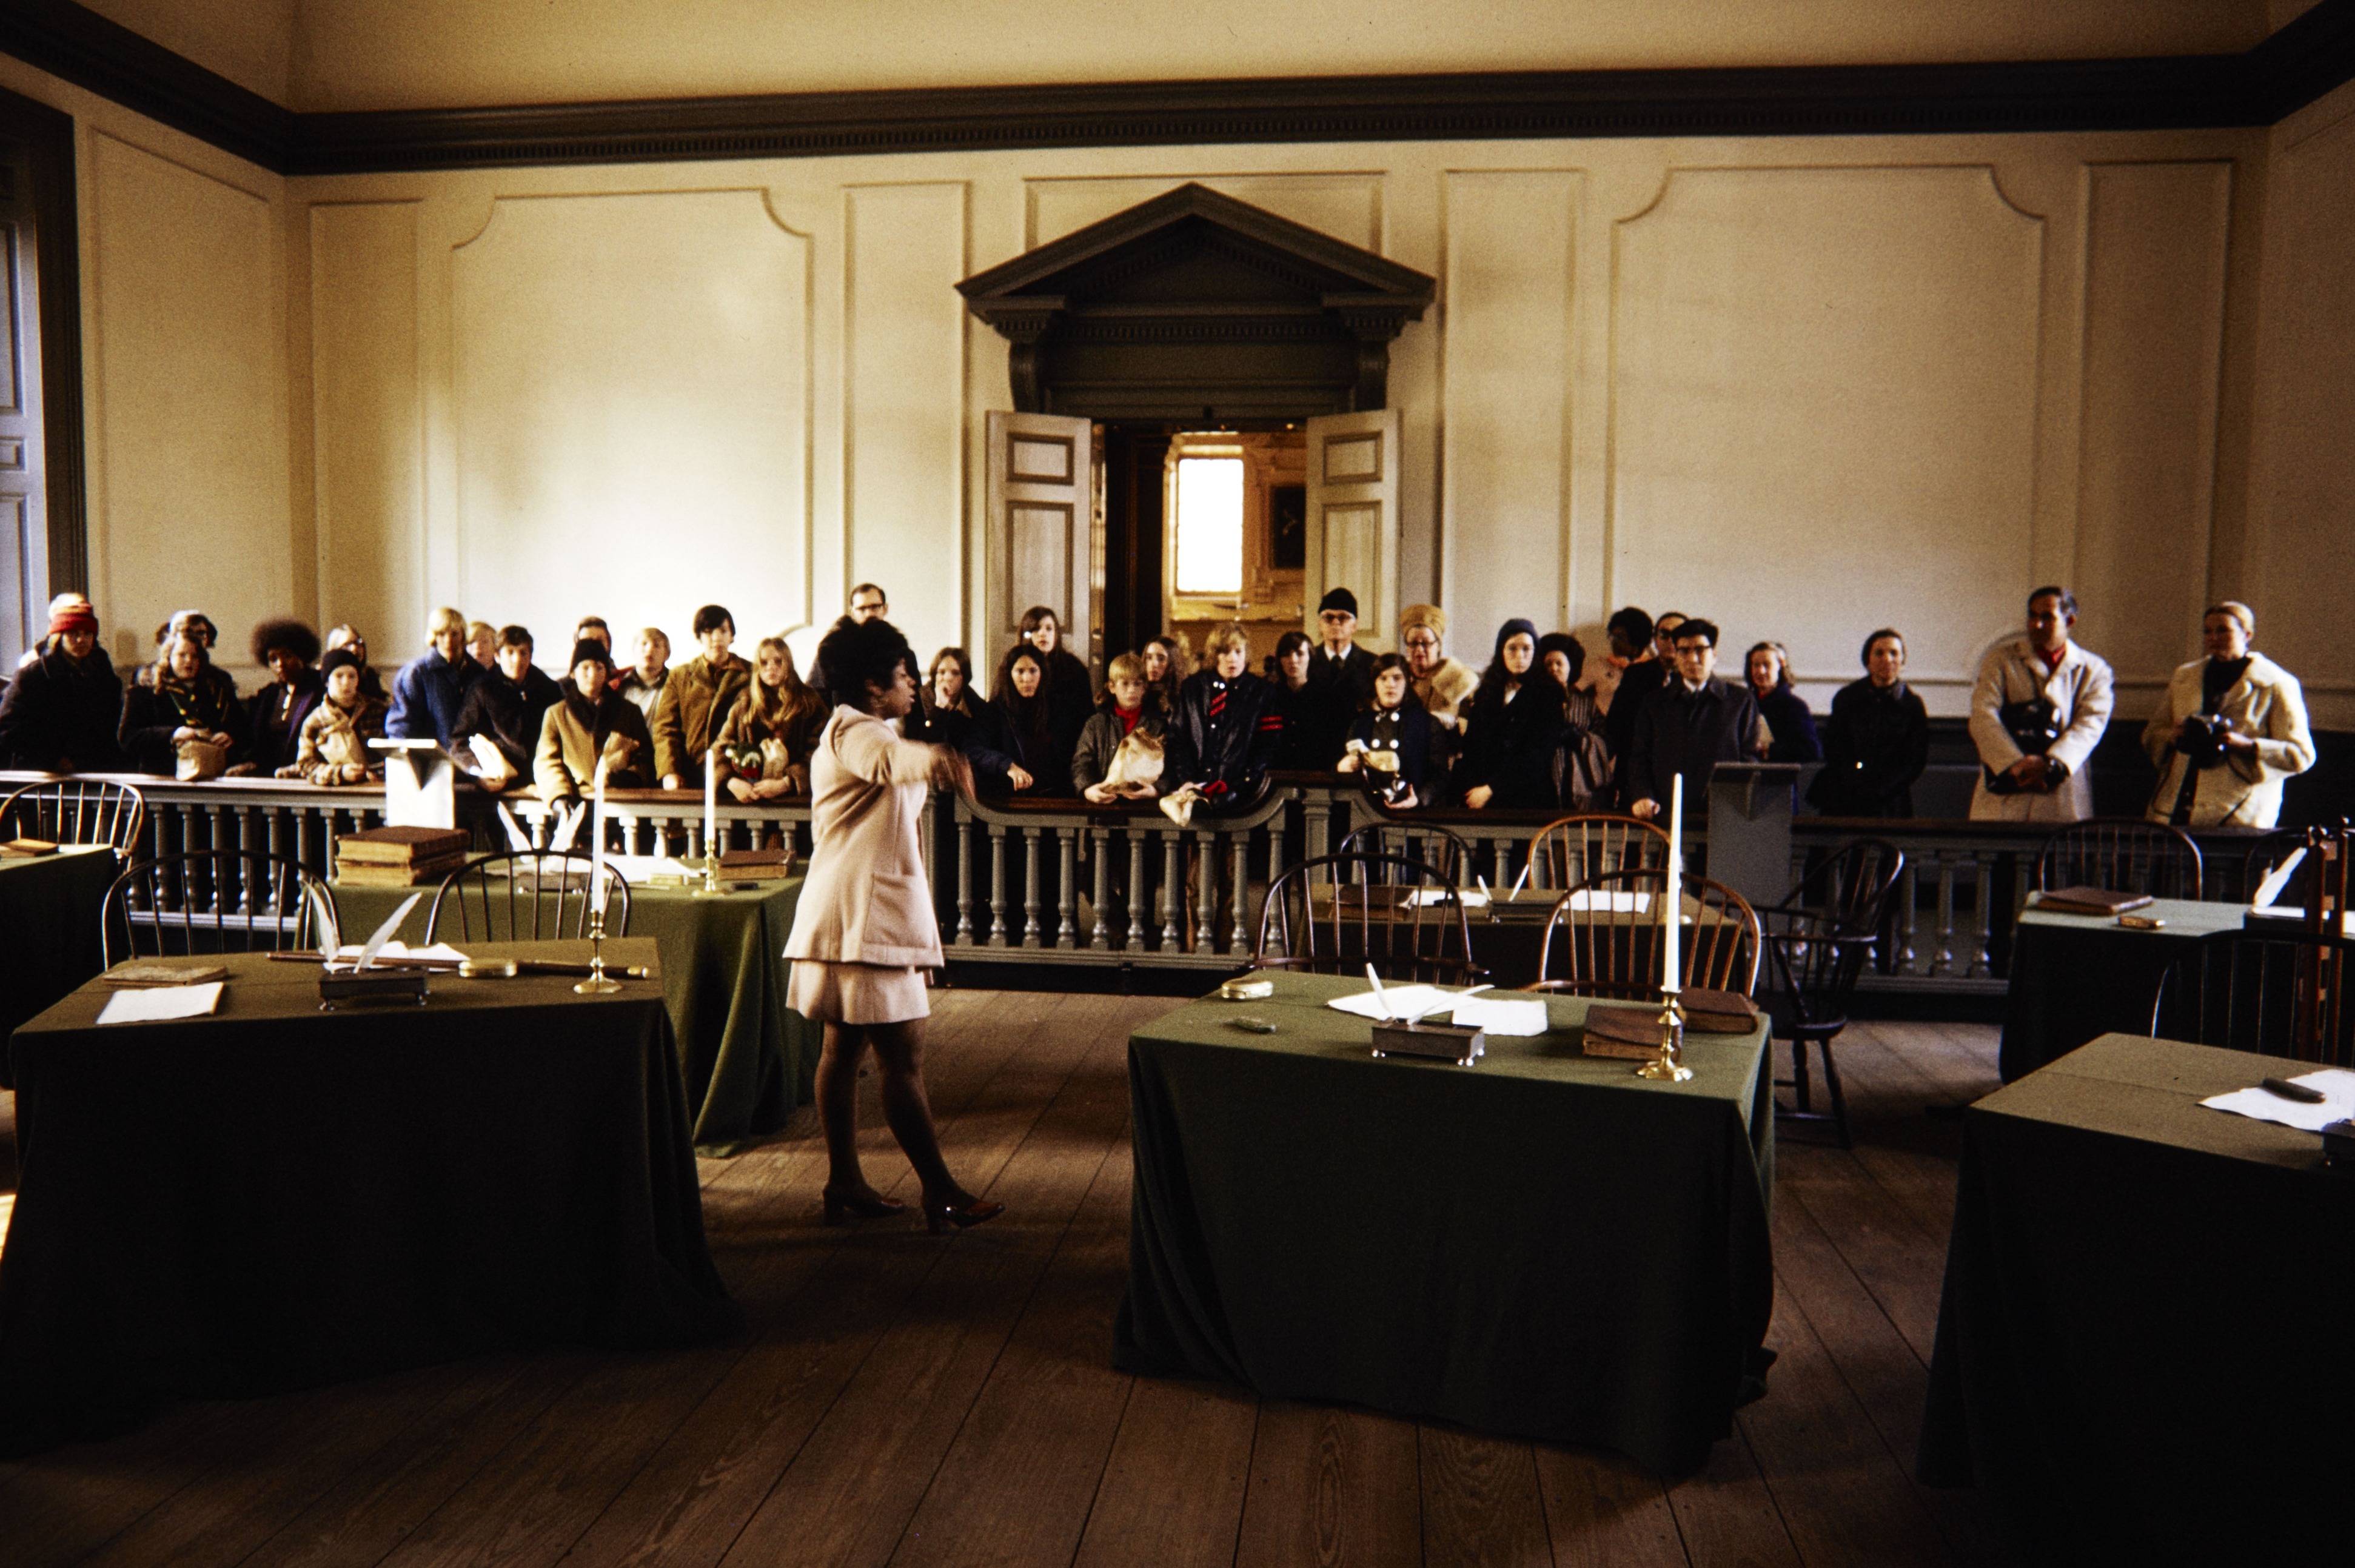 Woman in NPS uniform stands between two tables, addressing a large group of visitors standing behind a railing.